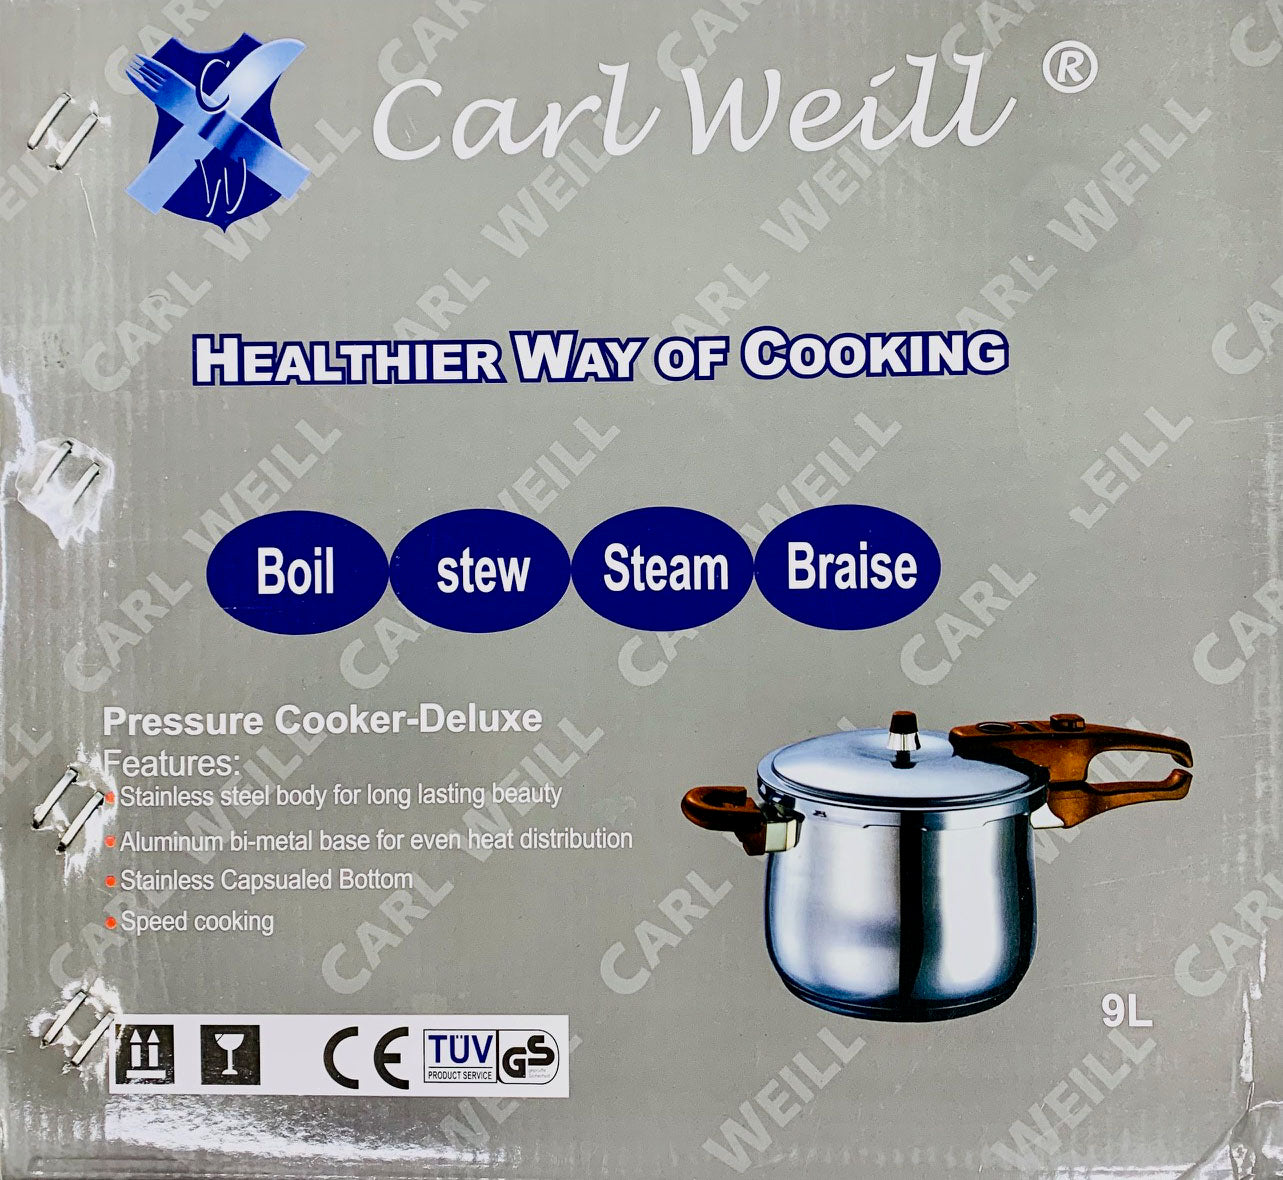 Pressure Cooker 9 Liter 18/10 Stainless Steel by Carl Weill. - Royal Gift